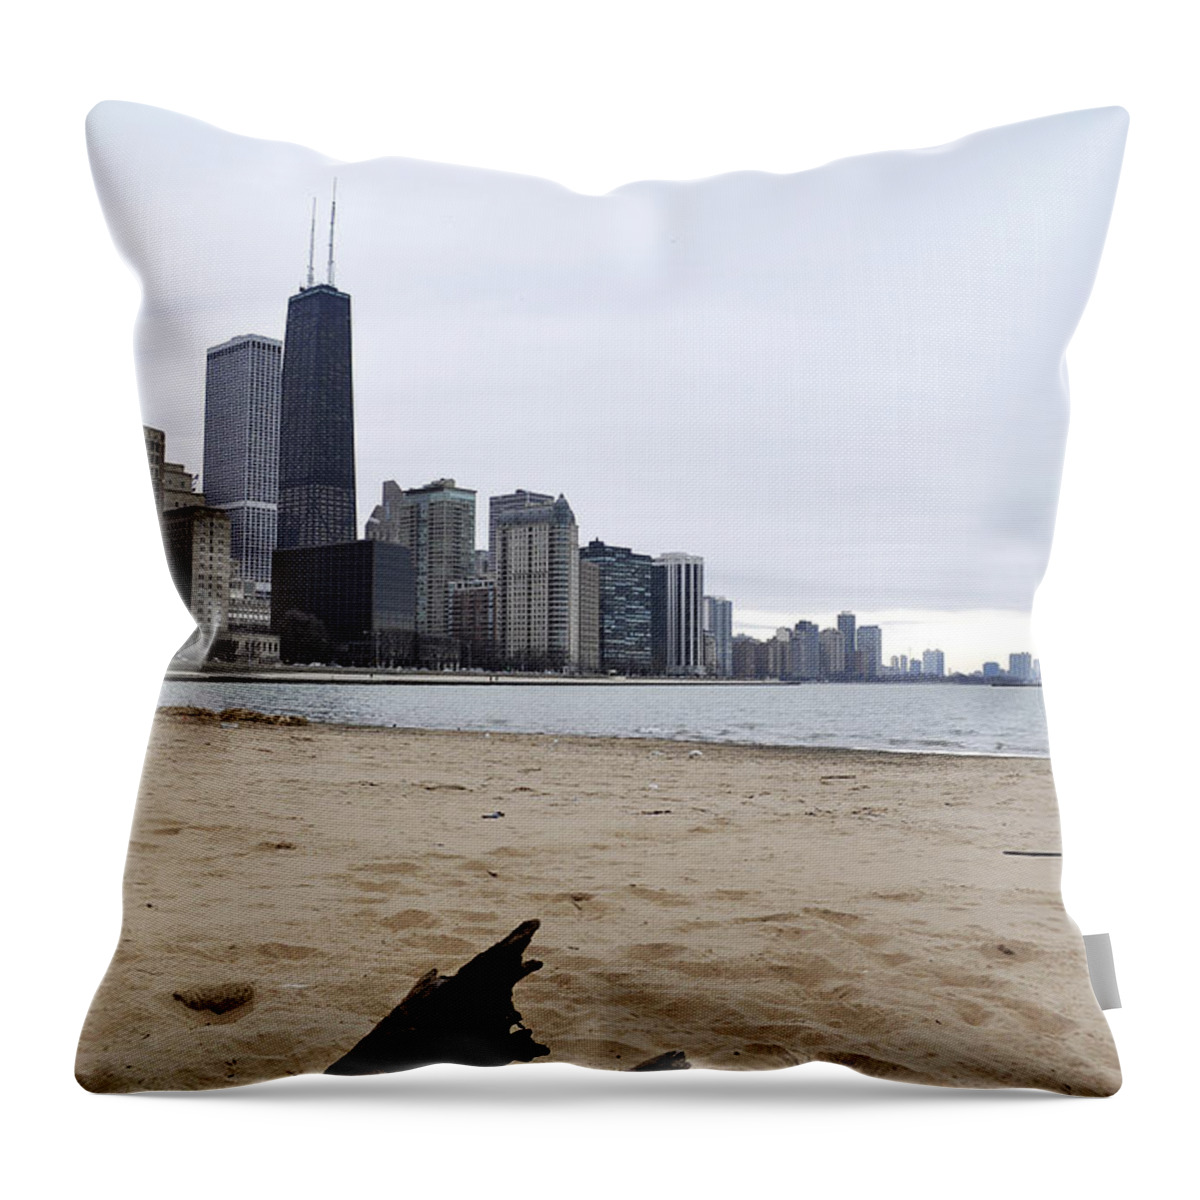 Chicago Throw Pillow featuring the photograph Love Chicago by Verana Stark